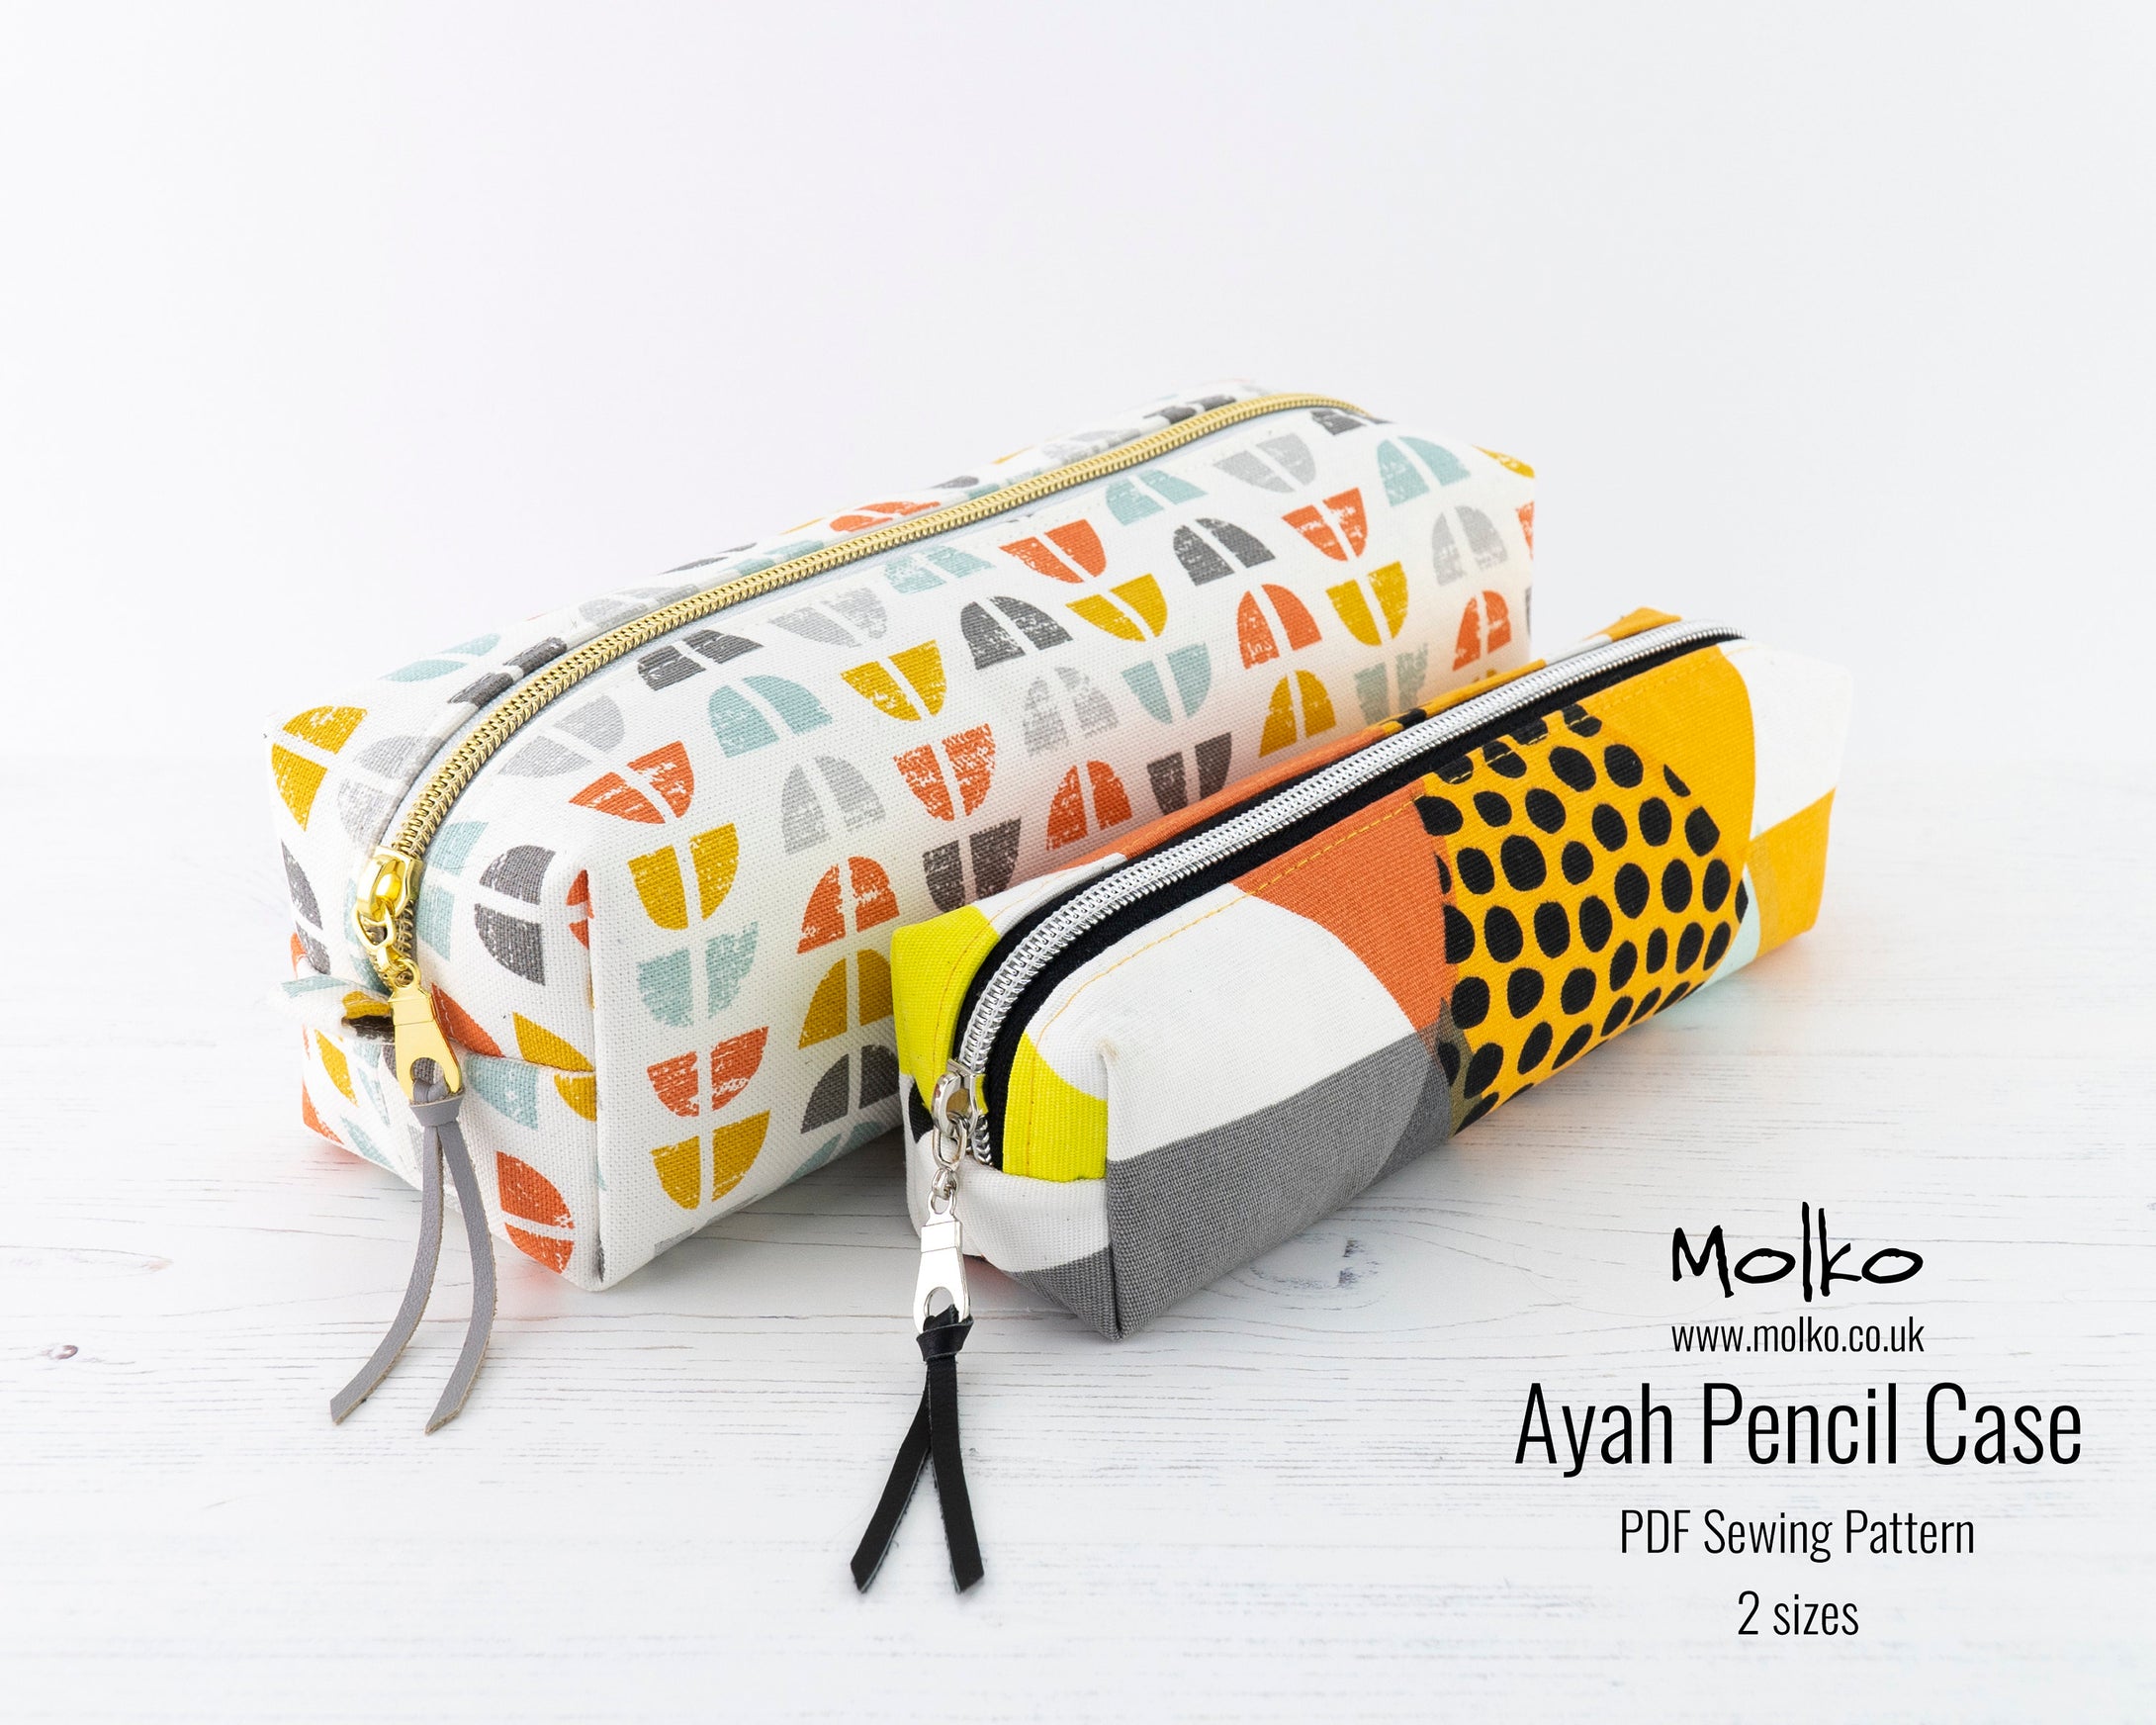 Ayah boxy pencil case sewing tutorial sewing pattern